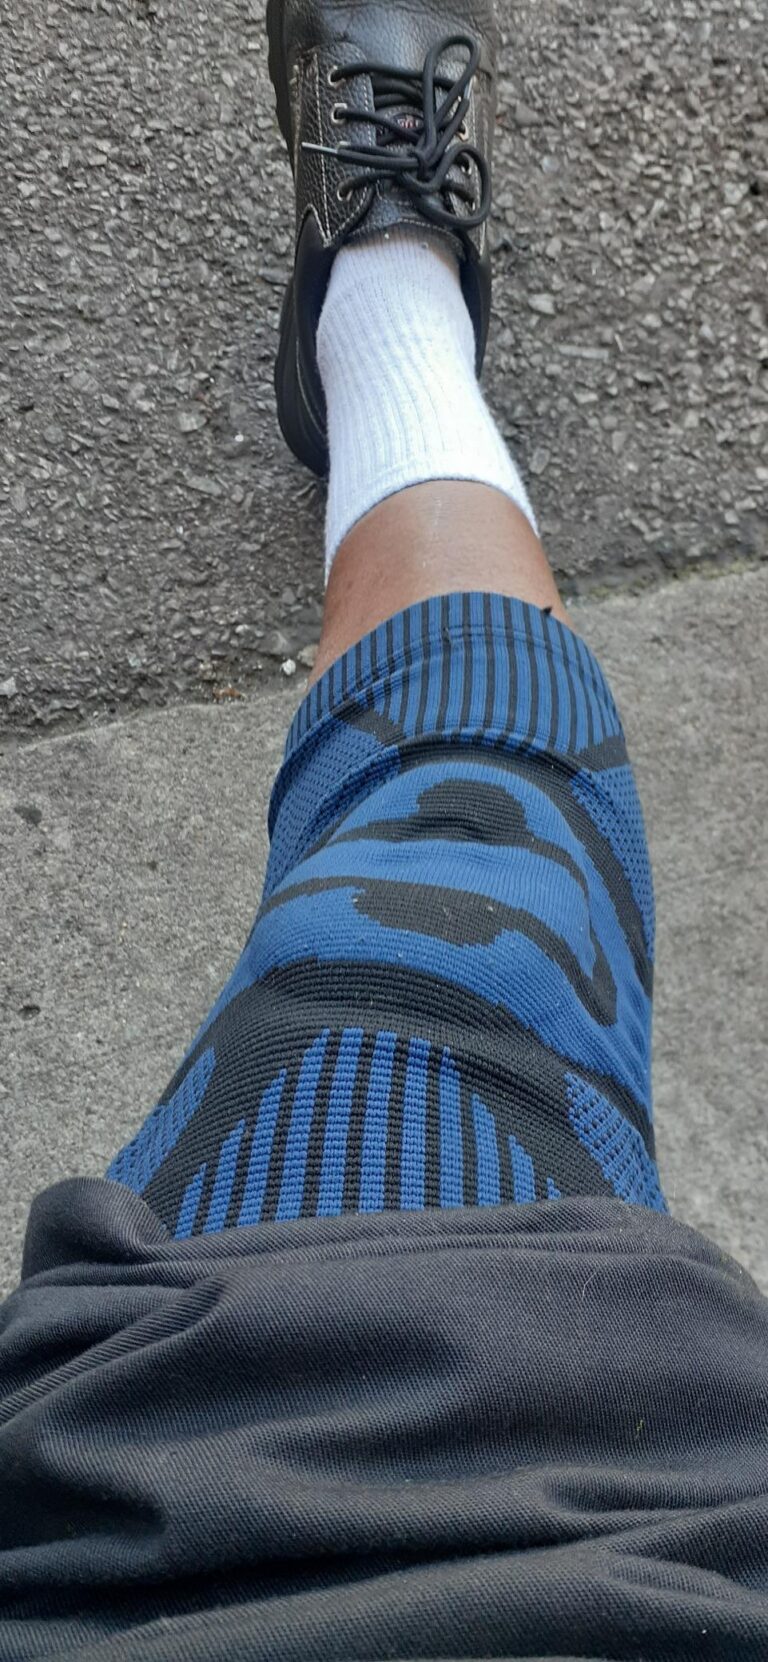 As soon as I received it I put it on and walked around for a while...This is the best thing I have purchased! I had injured my knee somehow..very painful to walk or bend..ever since I put the compression brace on I feel no pain!!.It supports my knee very well!! I will be purchasing another one definitely! Mr Brown. PHC ⭐⭐⭐⭐⭐